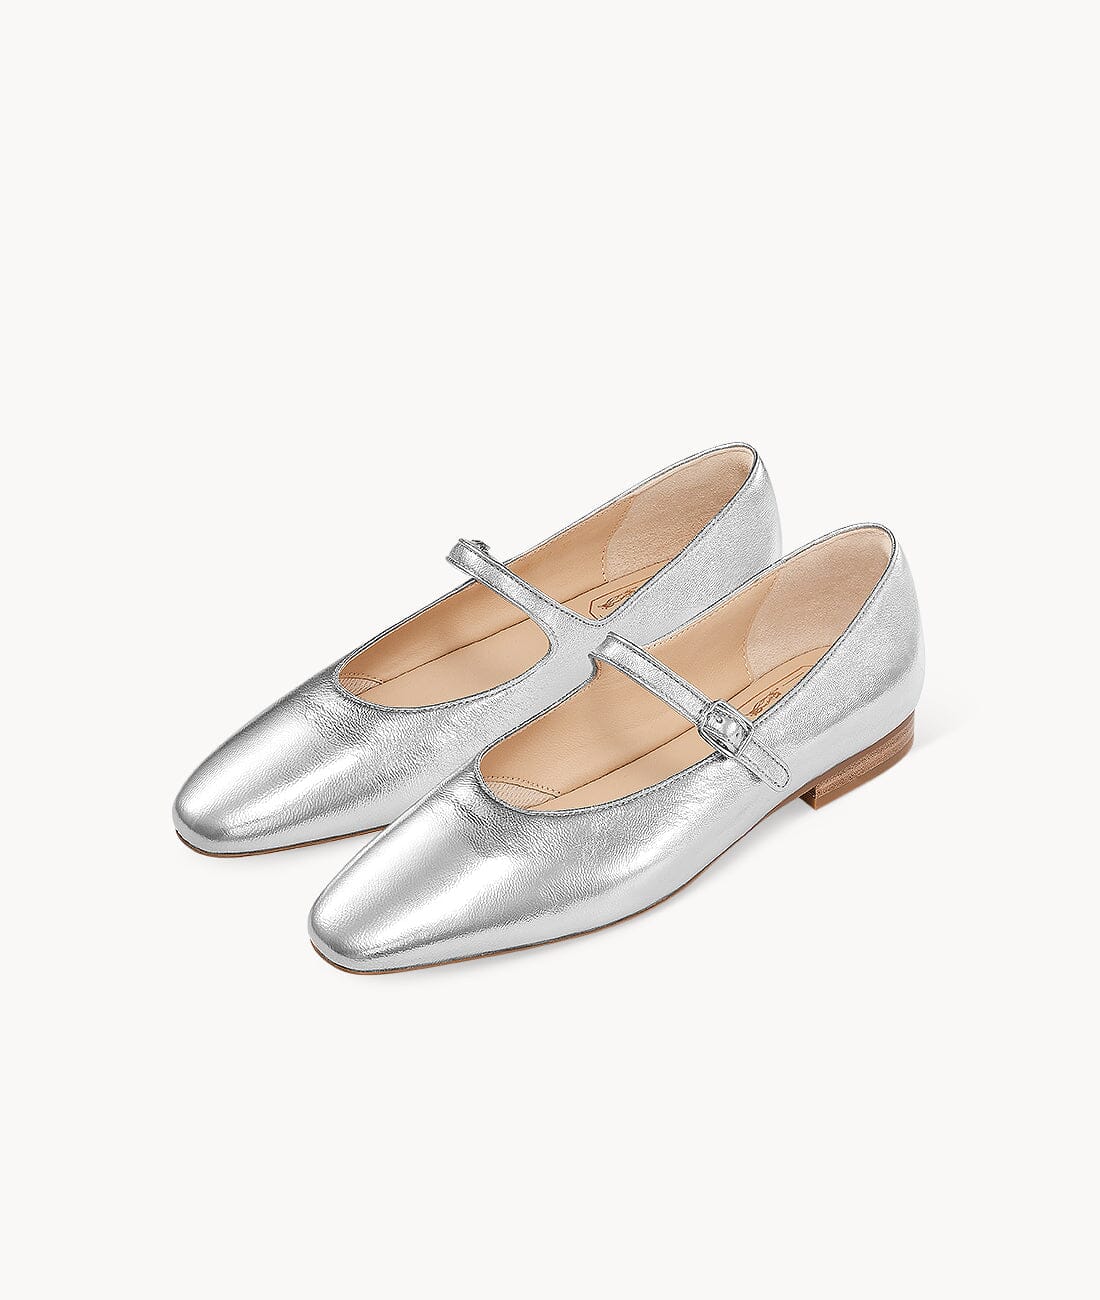 7or9 - Mint Candy - Flats&Loafers